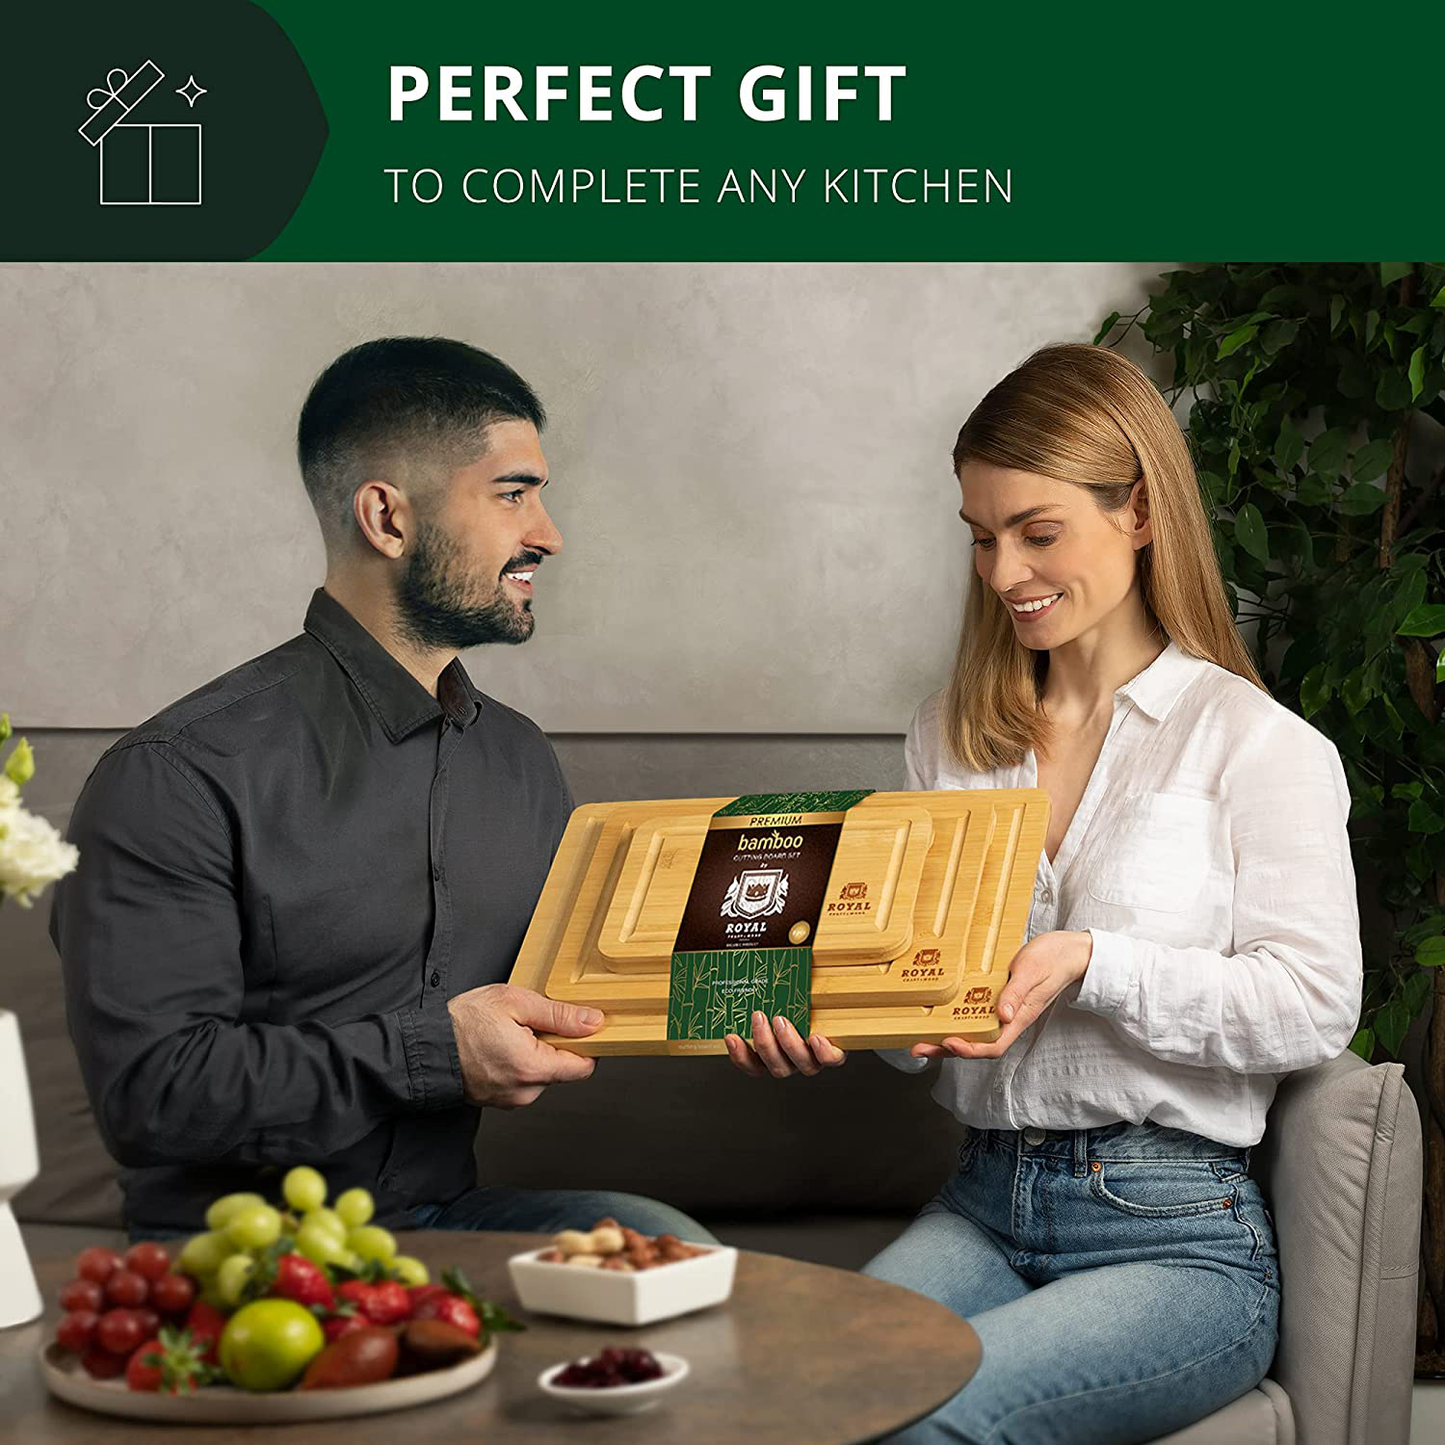 Bamboo Cutting Board Set with Juice Groove (3 Pieces) - Kitchen Chopping Board for Meat (Cutting Board) Cheese and Vegetables (Natural)